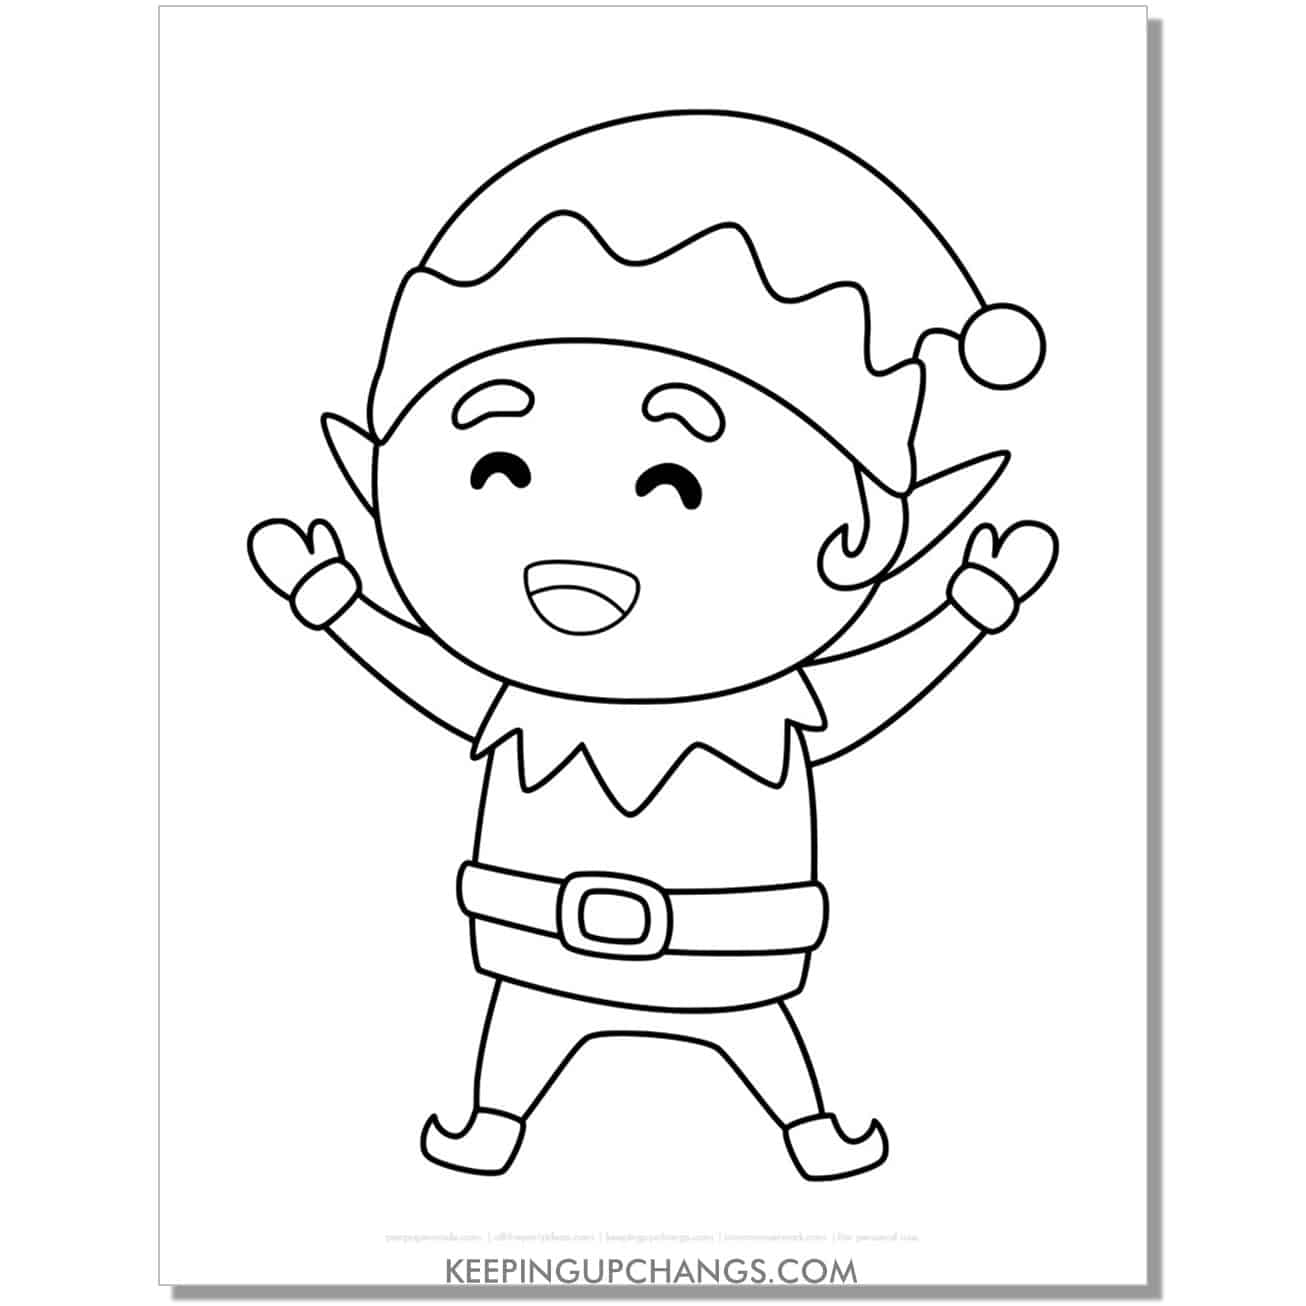 free happy, cute christmas elf coloring page.